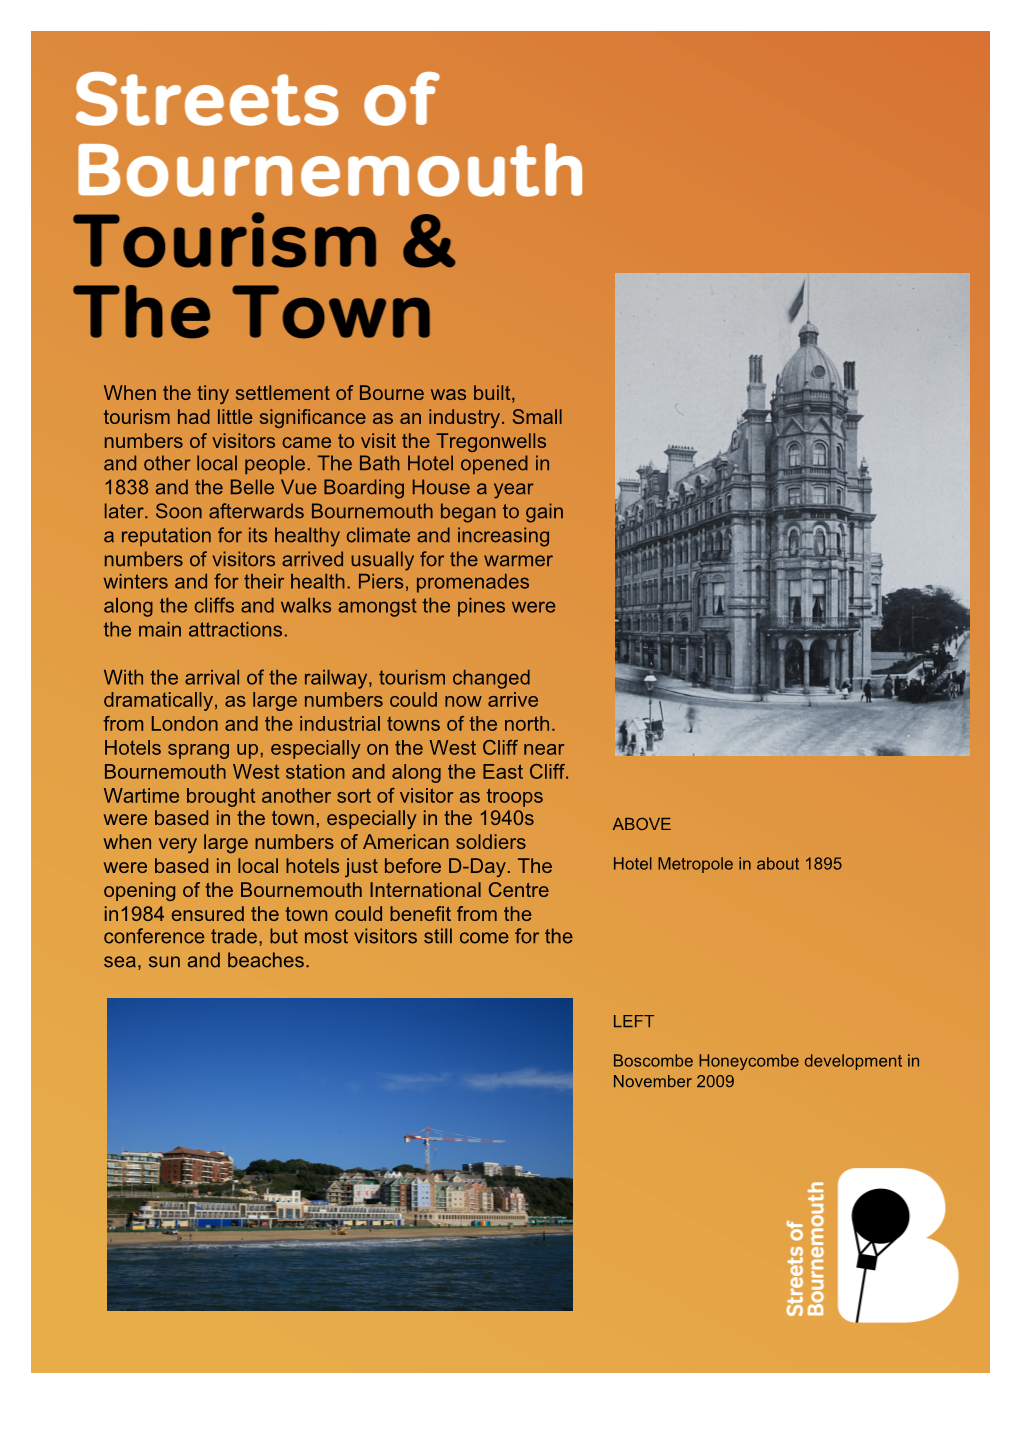 Tourism and the Town